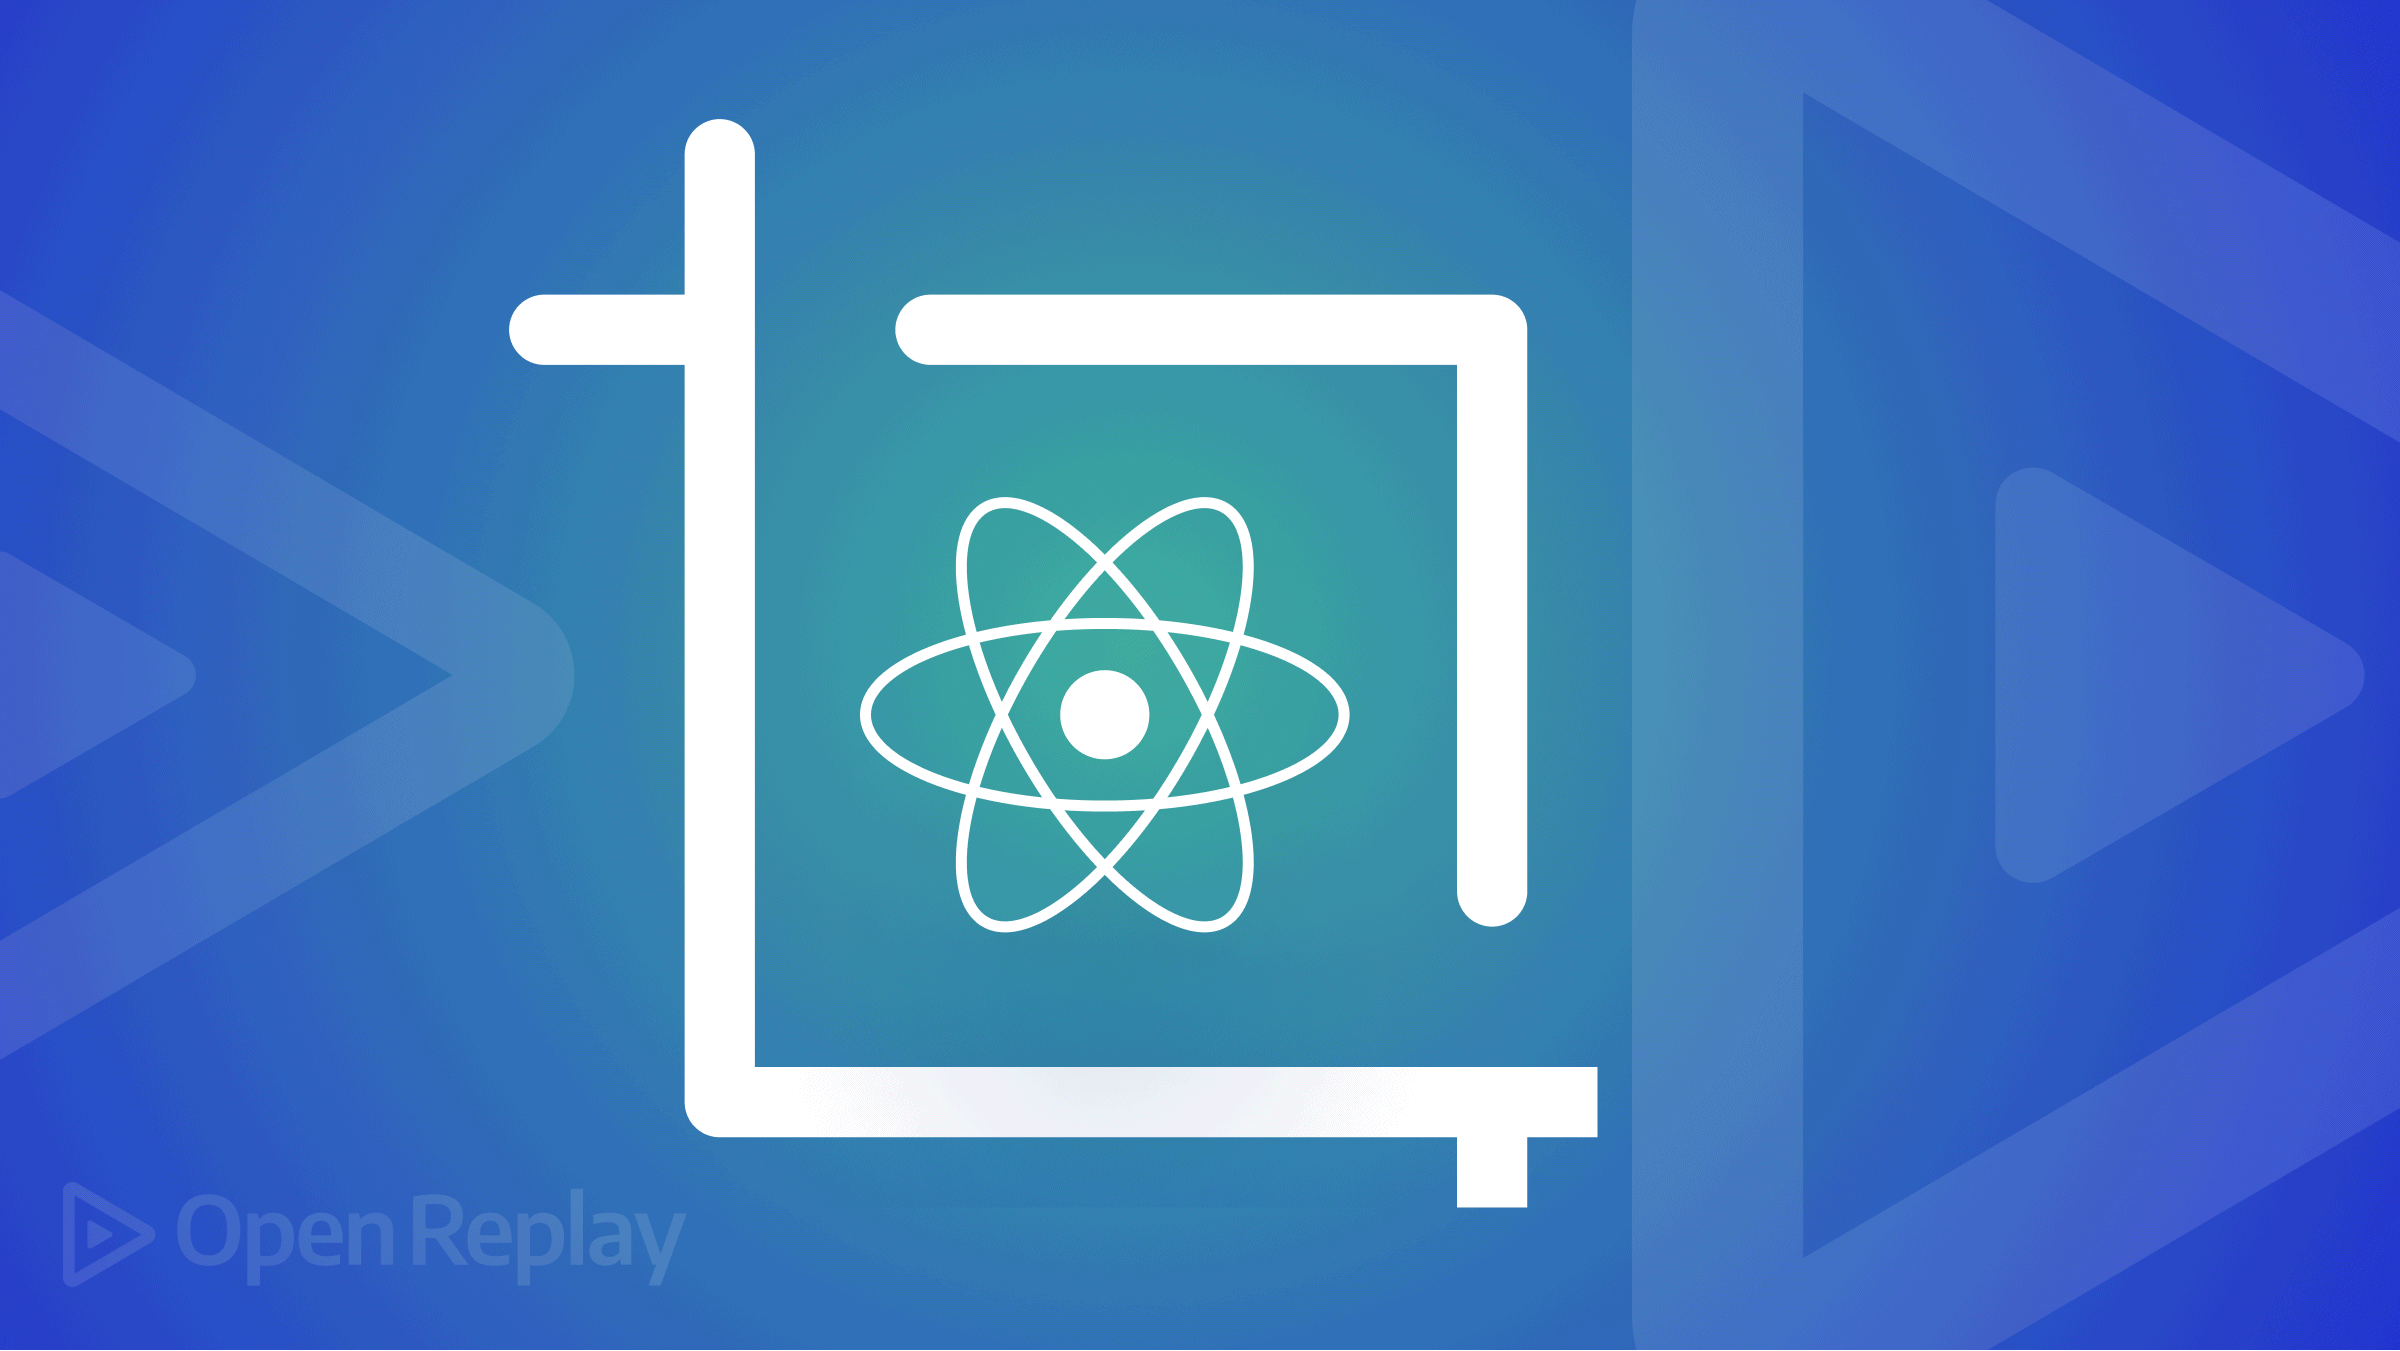 Image Manipulation with react-easy-crop